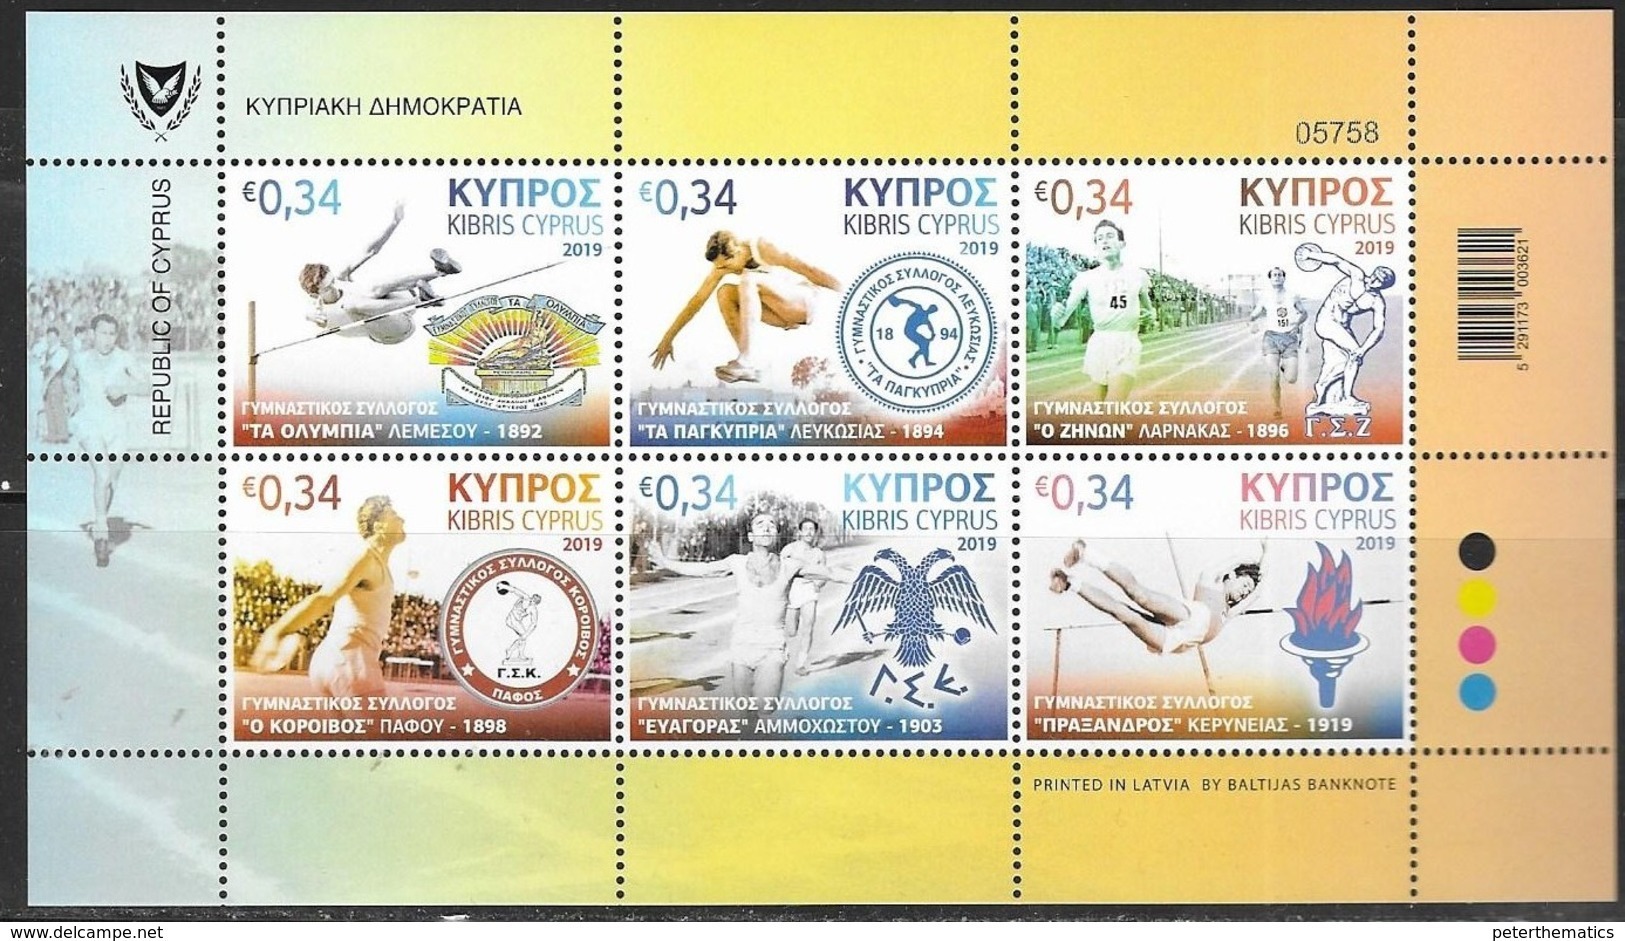 CYPRUS, 2019, MNH,ATHLETICS, ATHLETIC CLUBS,  BLACK AND WHITE SPORTS PHOTOS, SHEETLET - Athletics